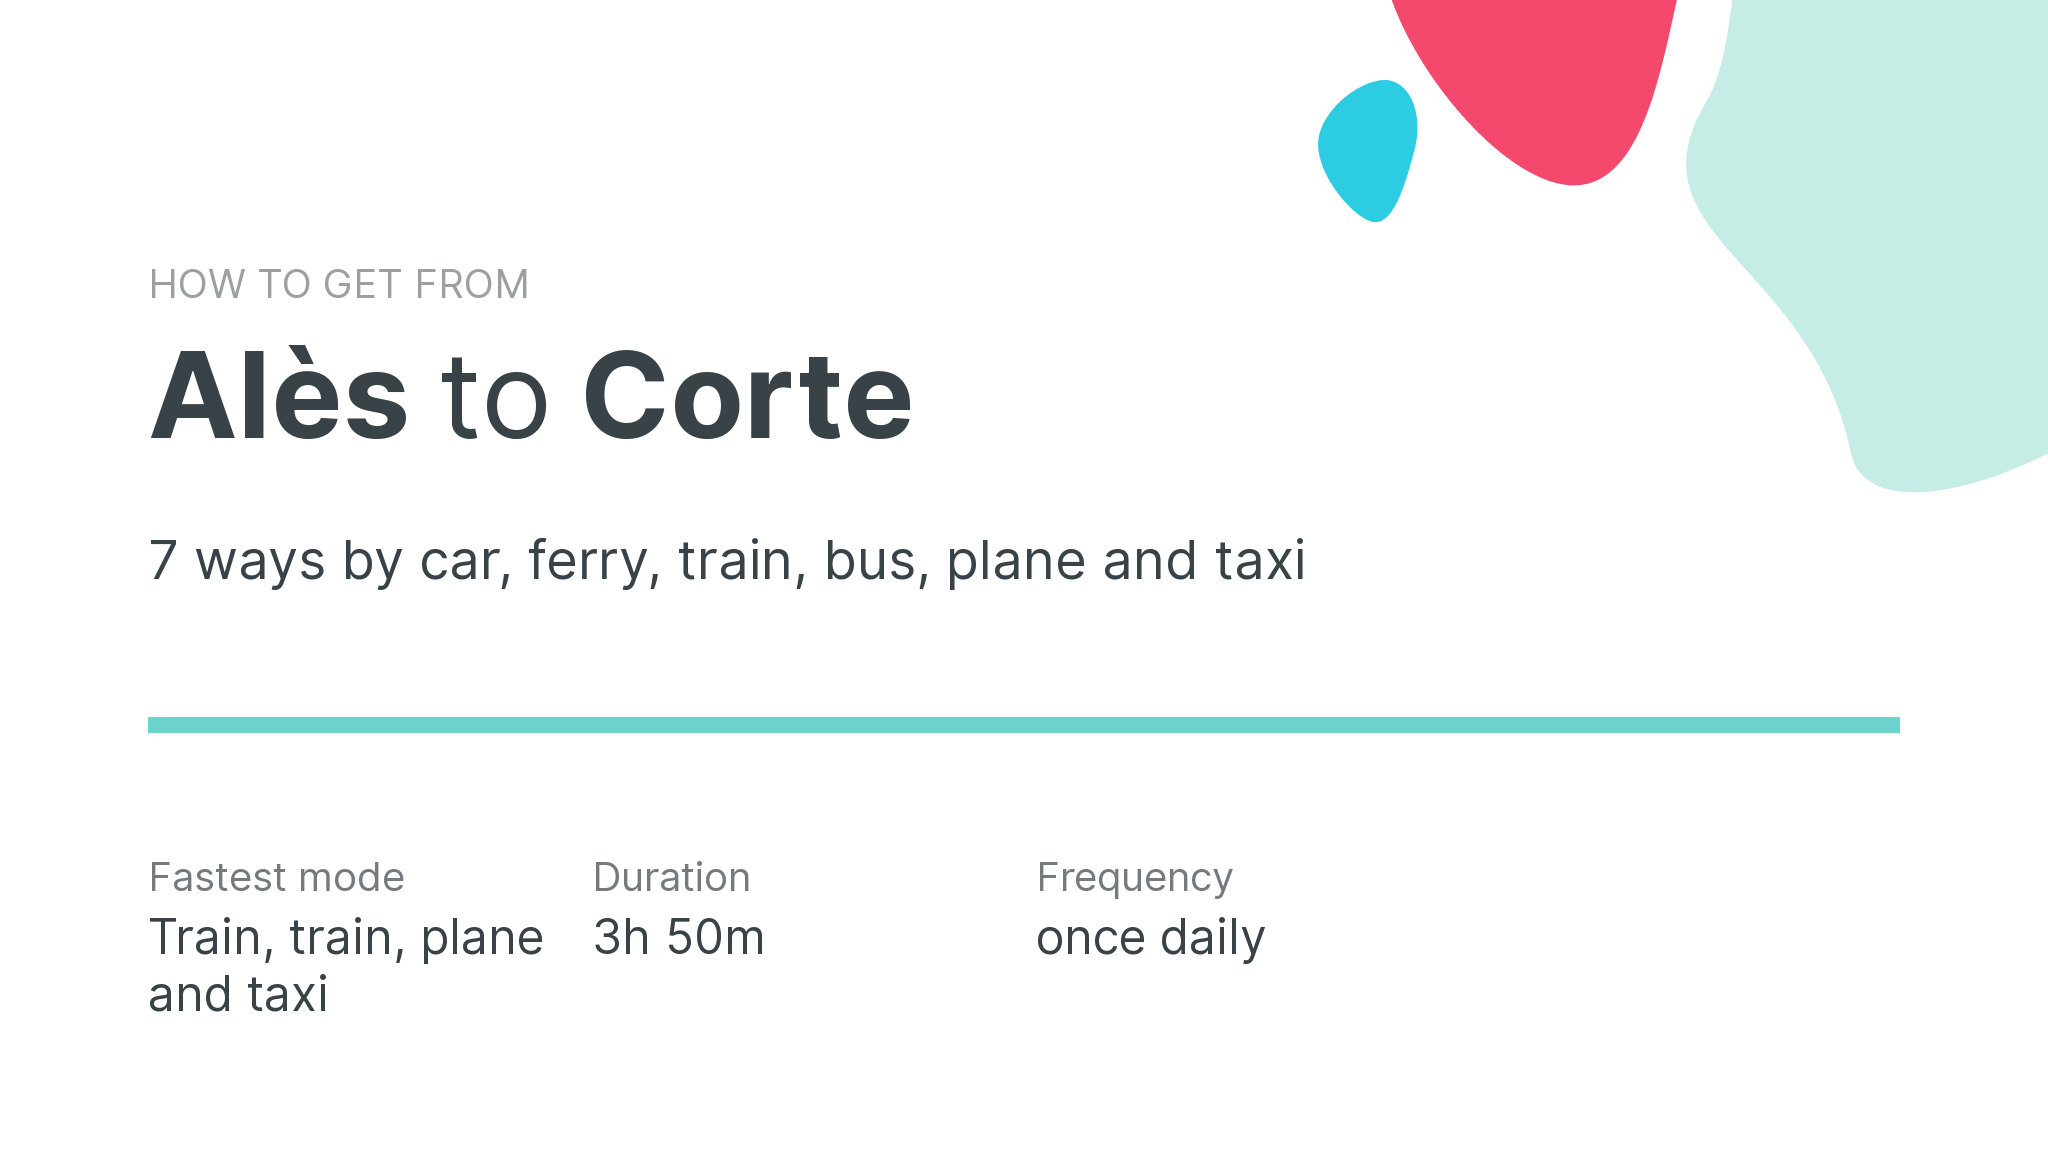 How do I get from Alès to Corte